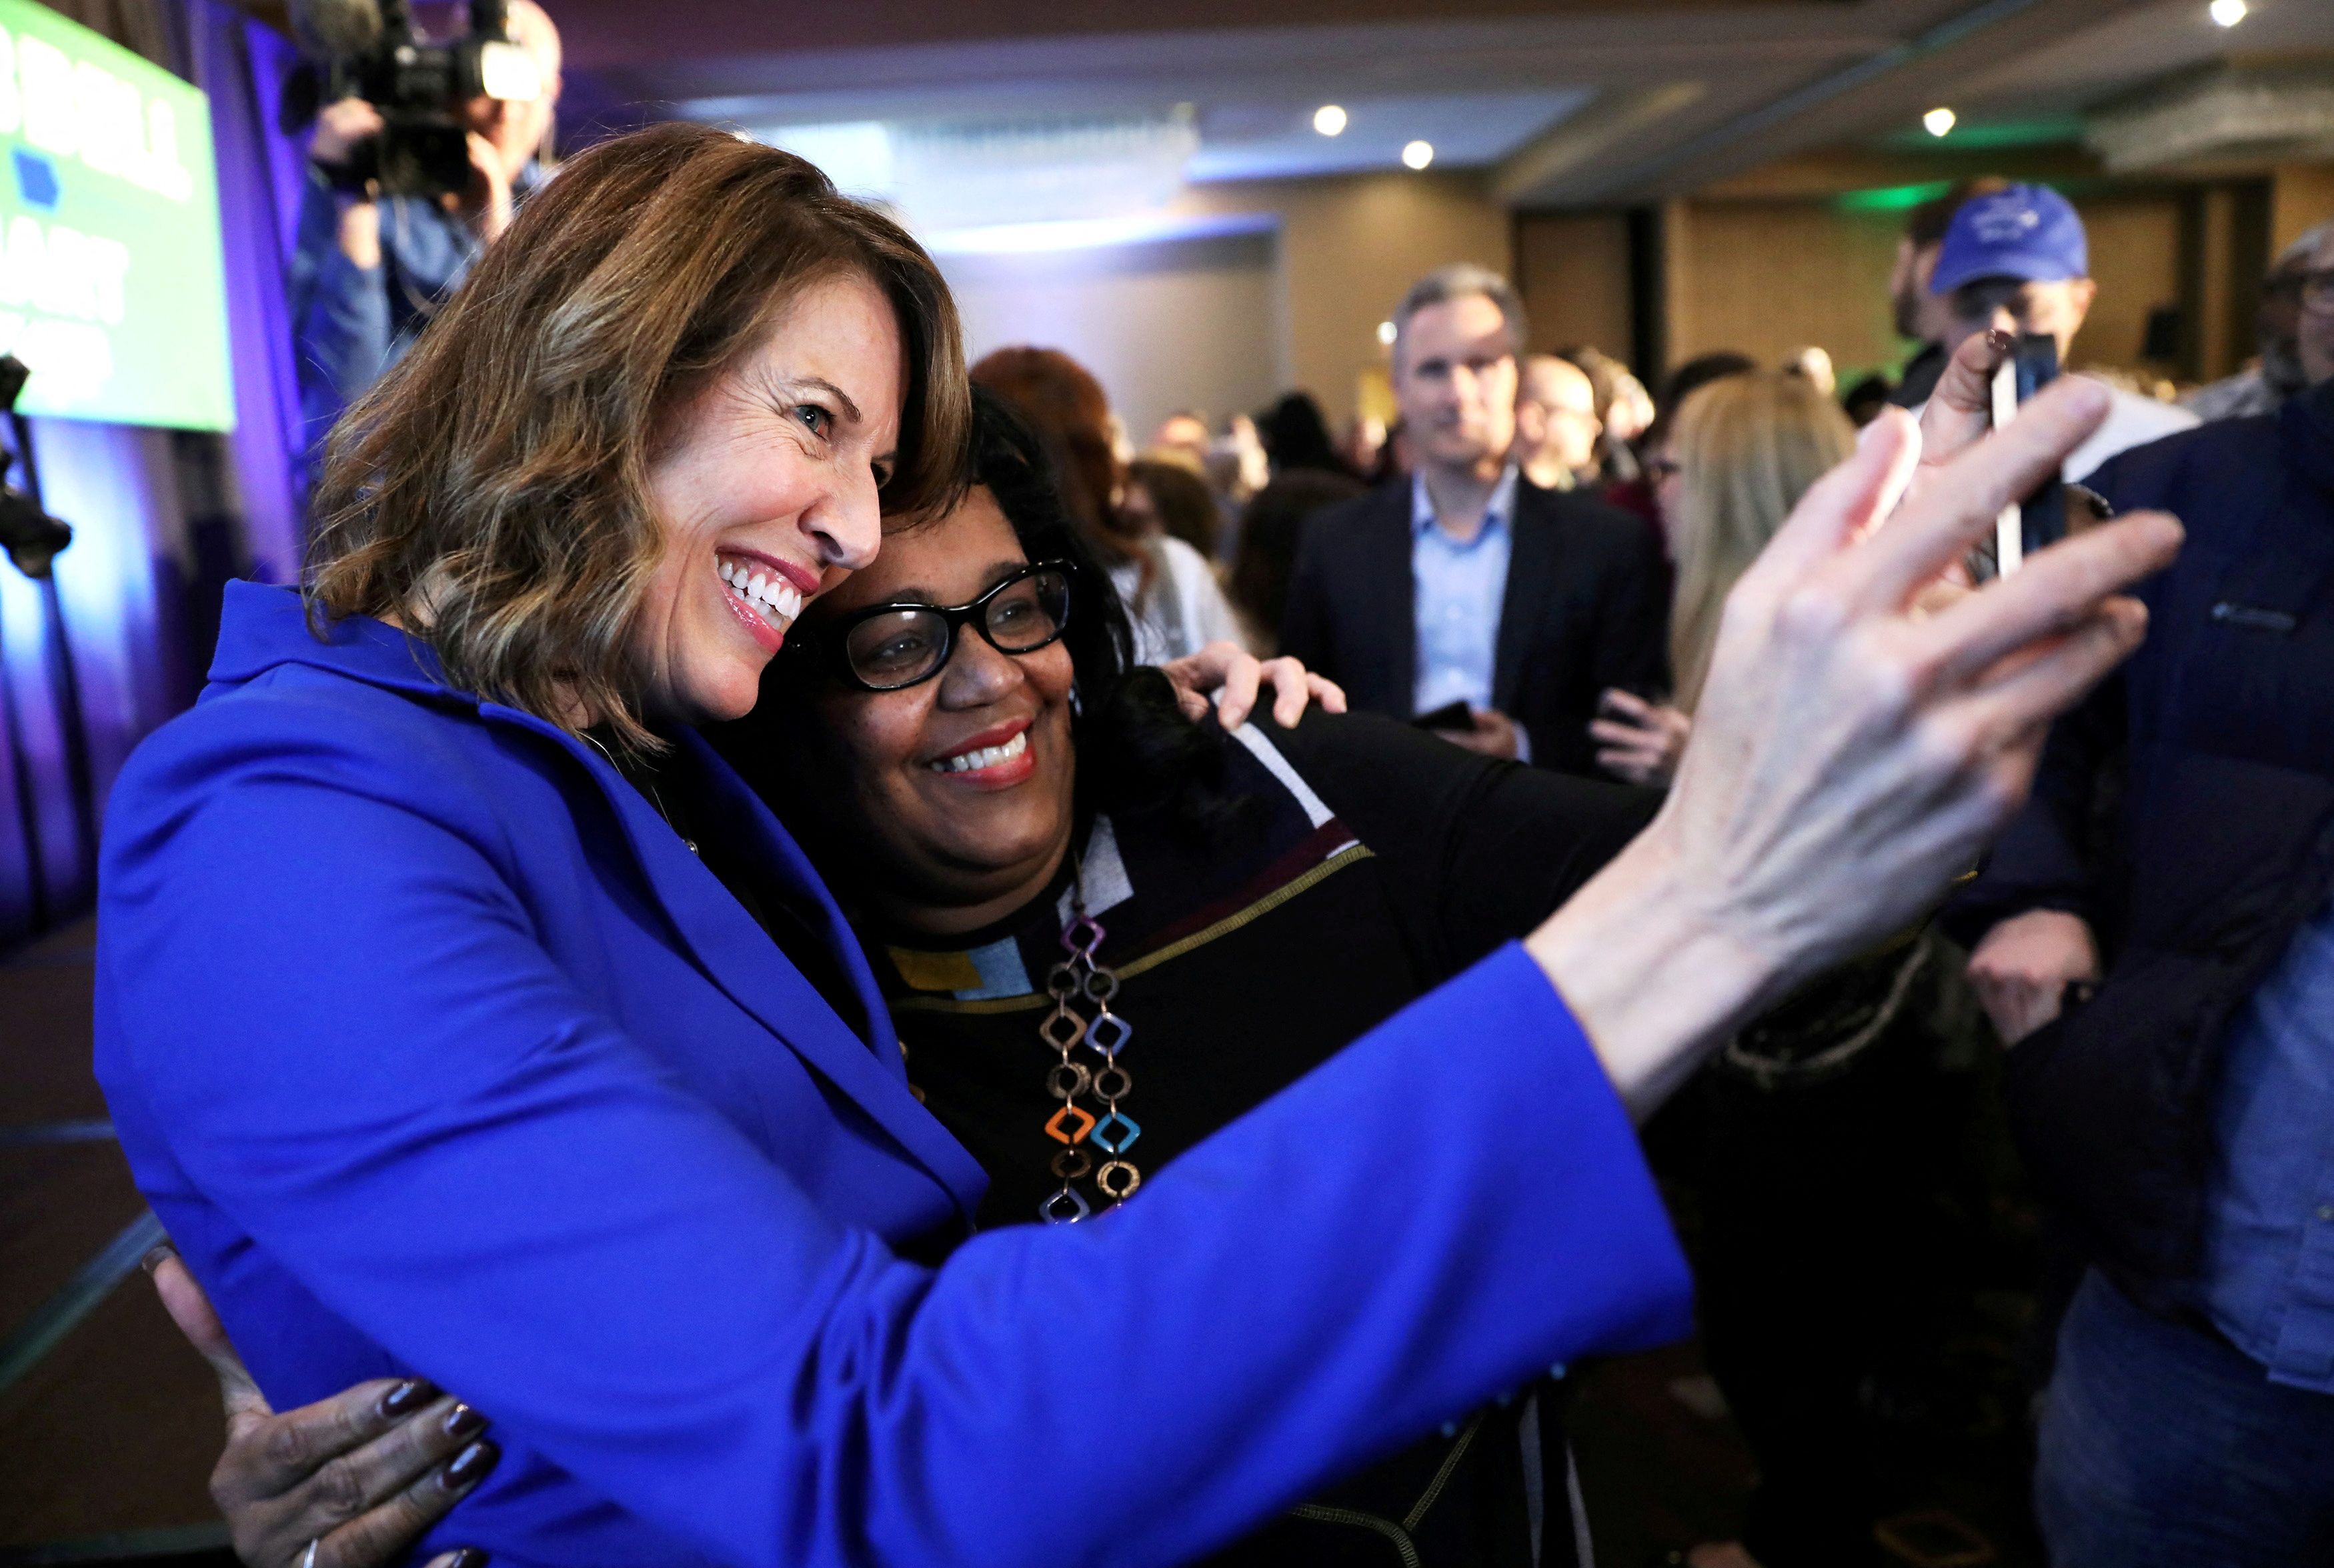 Democratic congressional candidate Cindy Axne (left) takes a photo with West Des Moines City Councilwoman Renee Hardman while appearing at her midterm election night party in Des Moines, Iowa